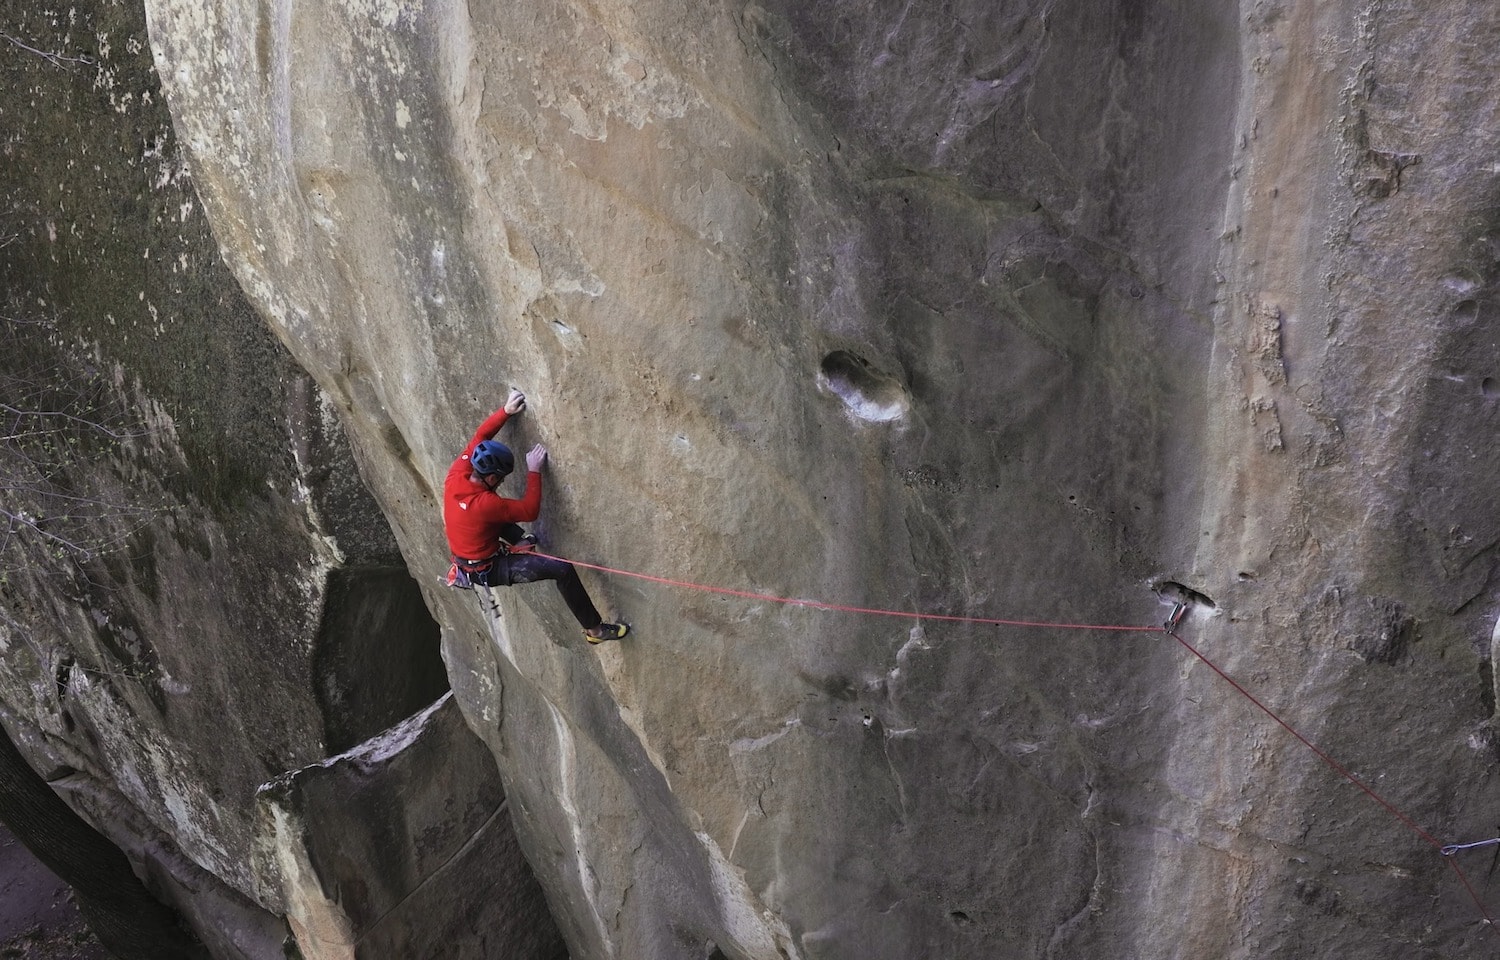 James Pearson trad climber bon voyage first ascent hardest trad route